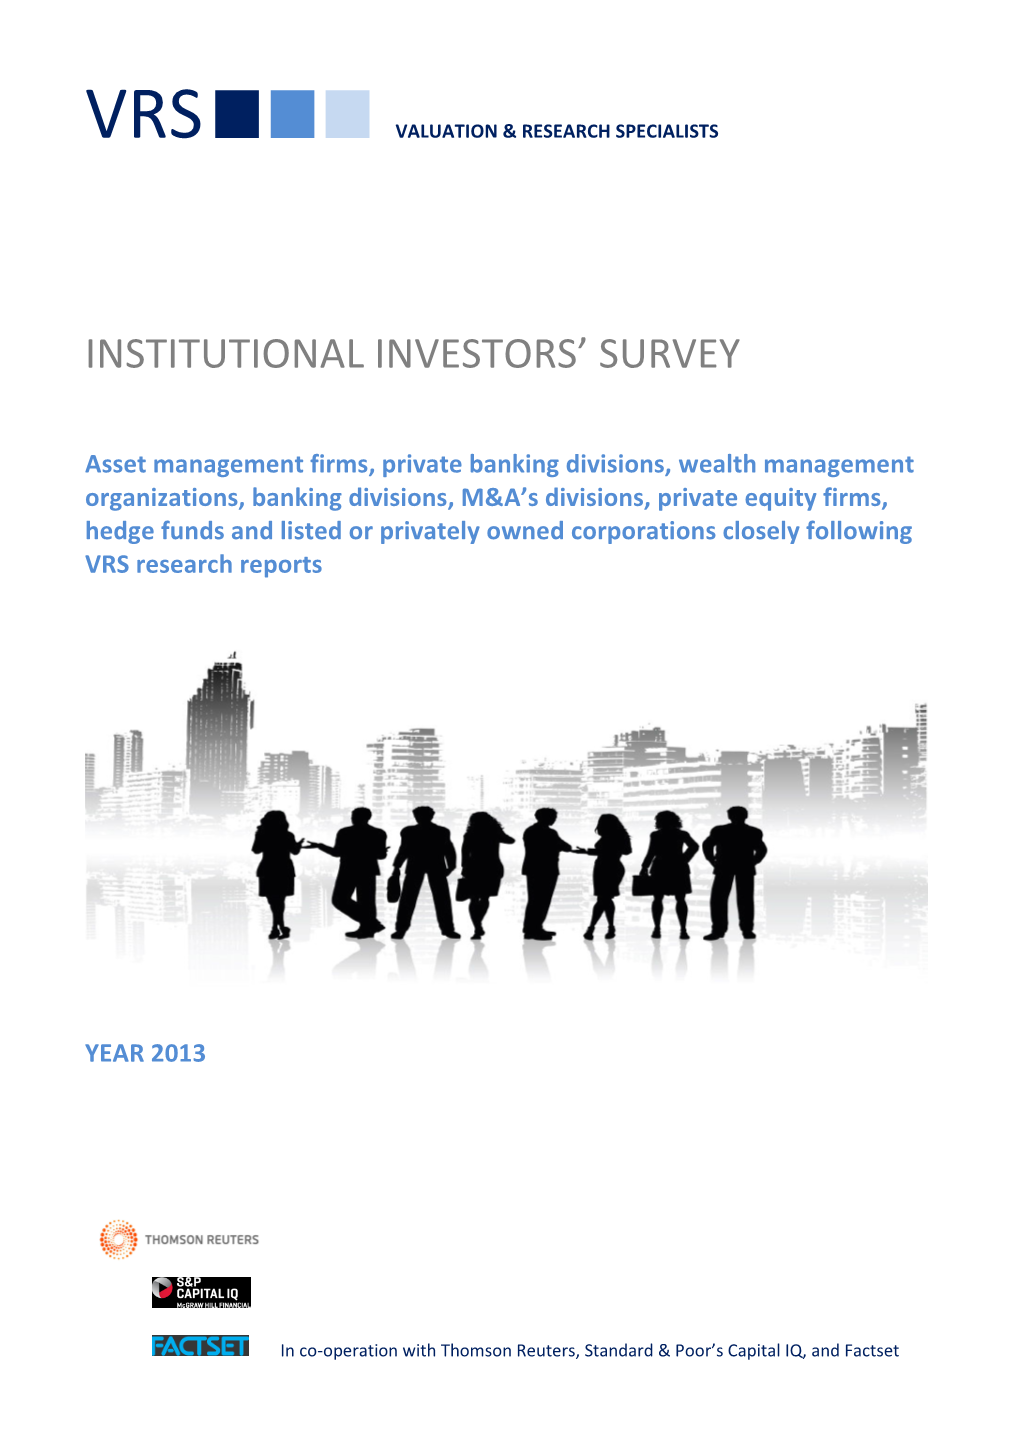 Institutional Investors and VRS Reports Survey